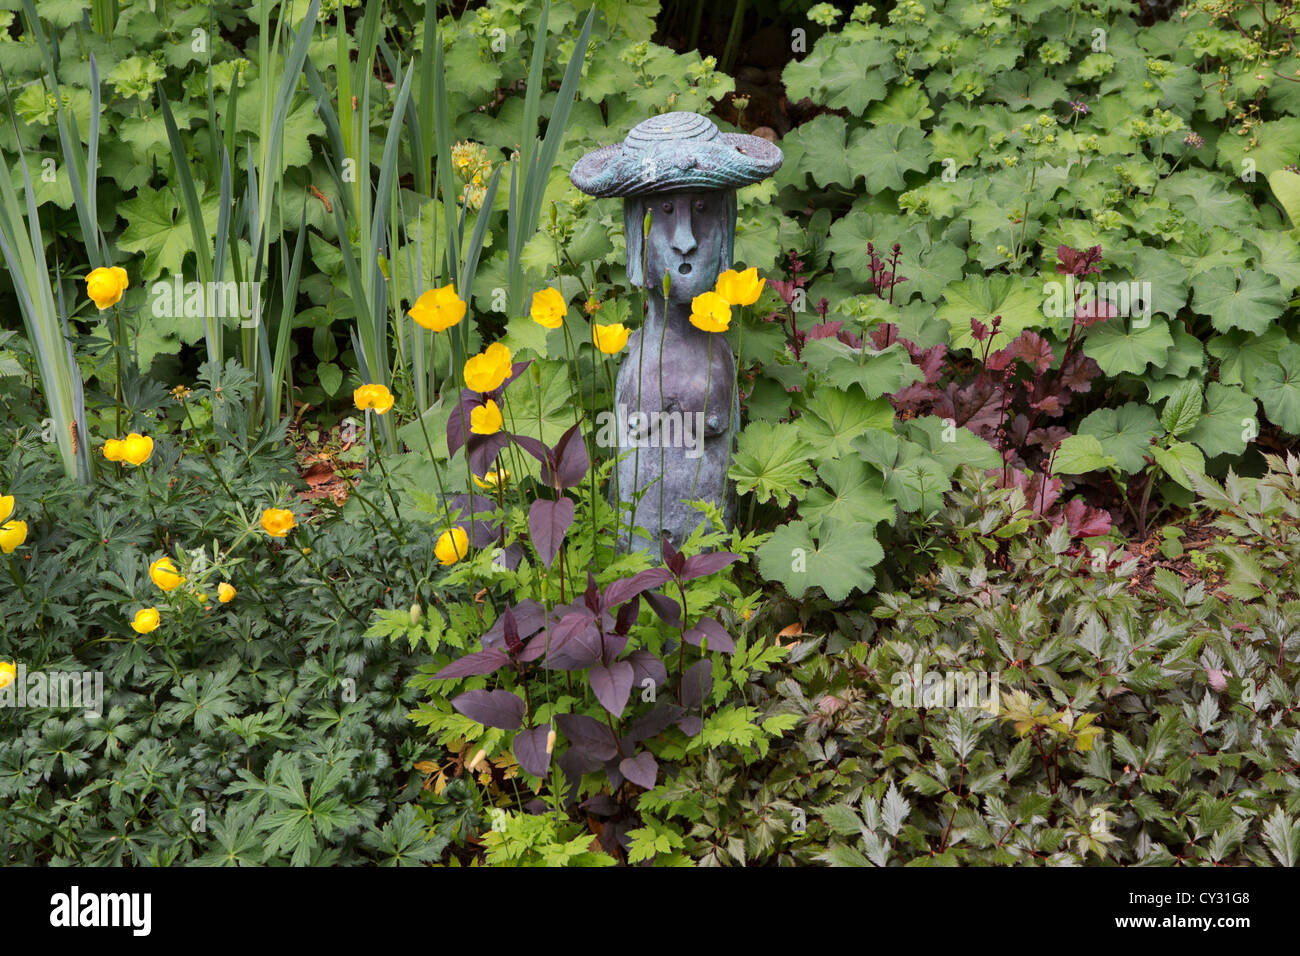 Whimsical statue of a woman at Barnsdale Gardens, Rutland Stock Photo